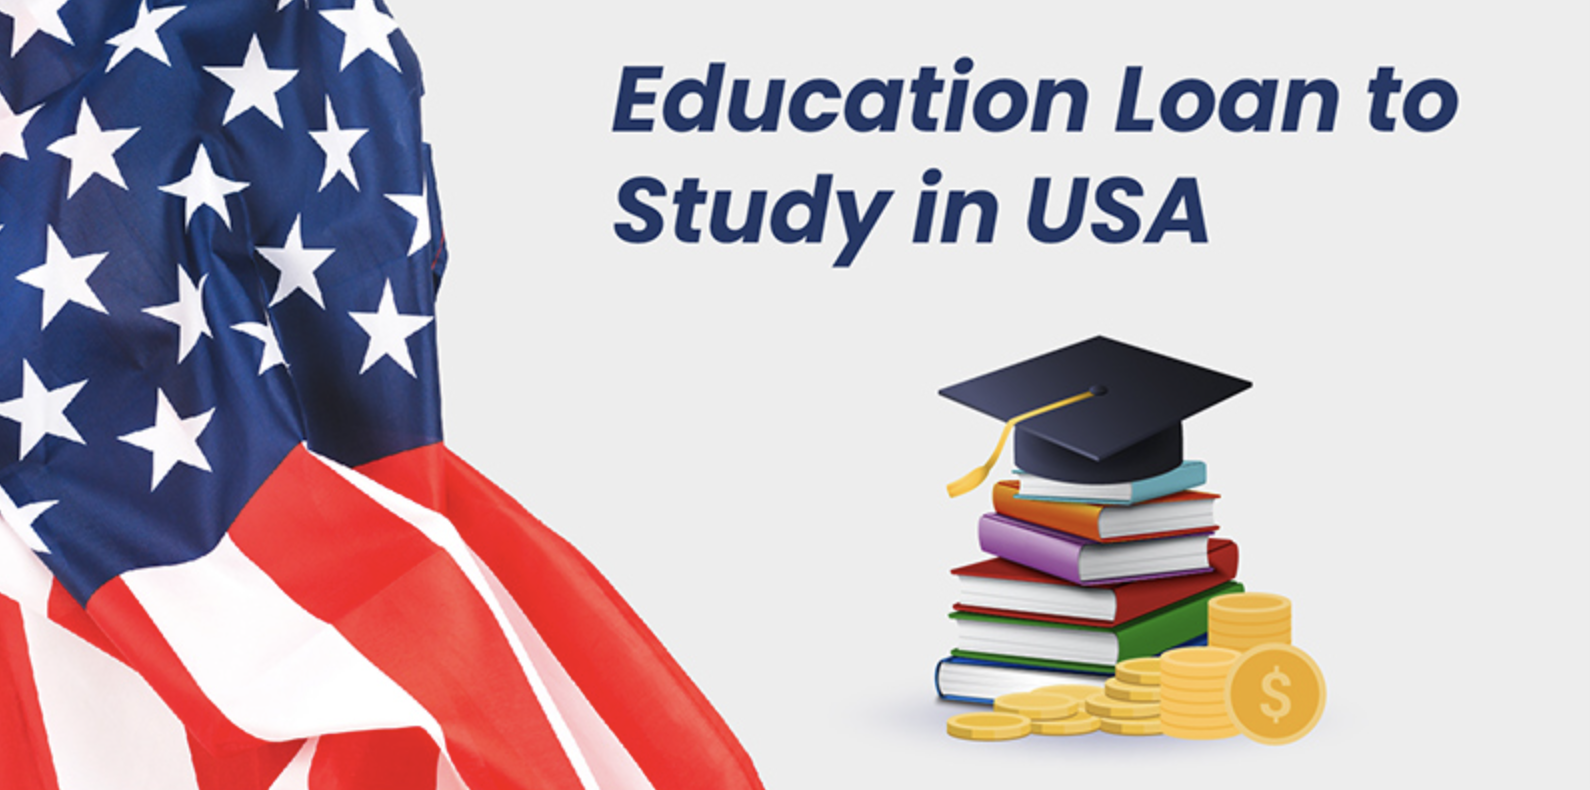 How to get the Education Loan to Study in the USA?